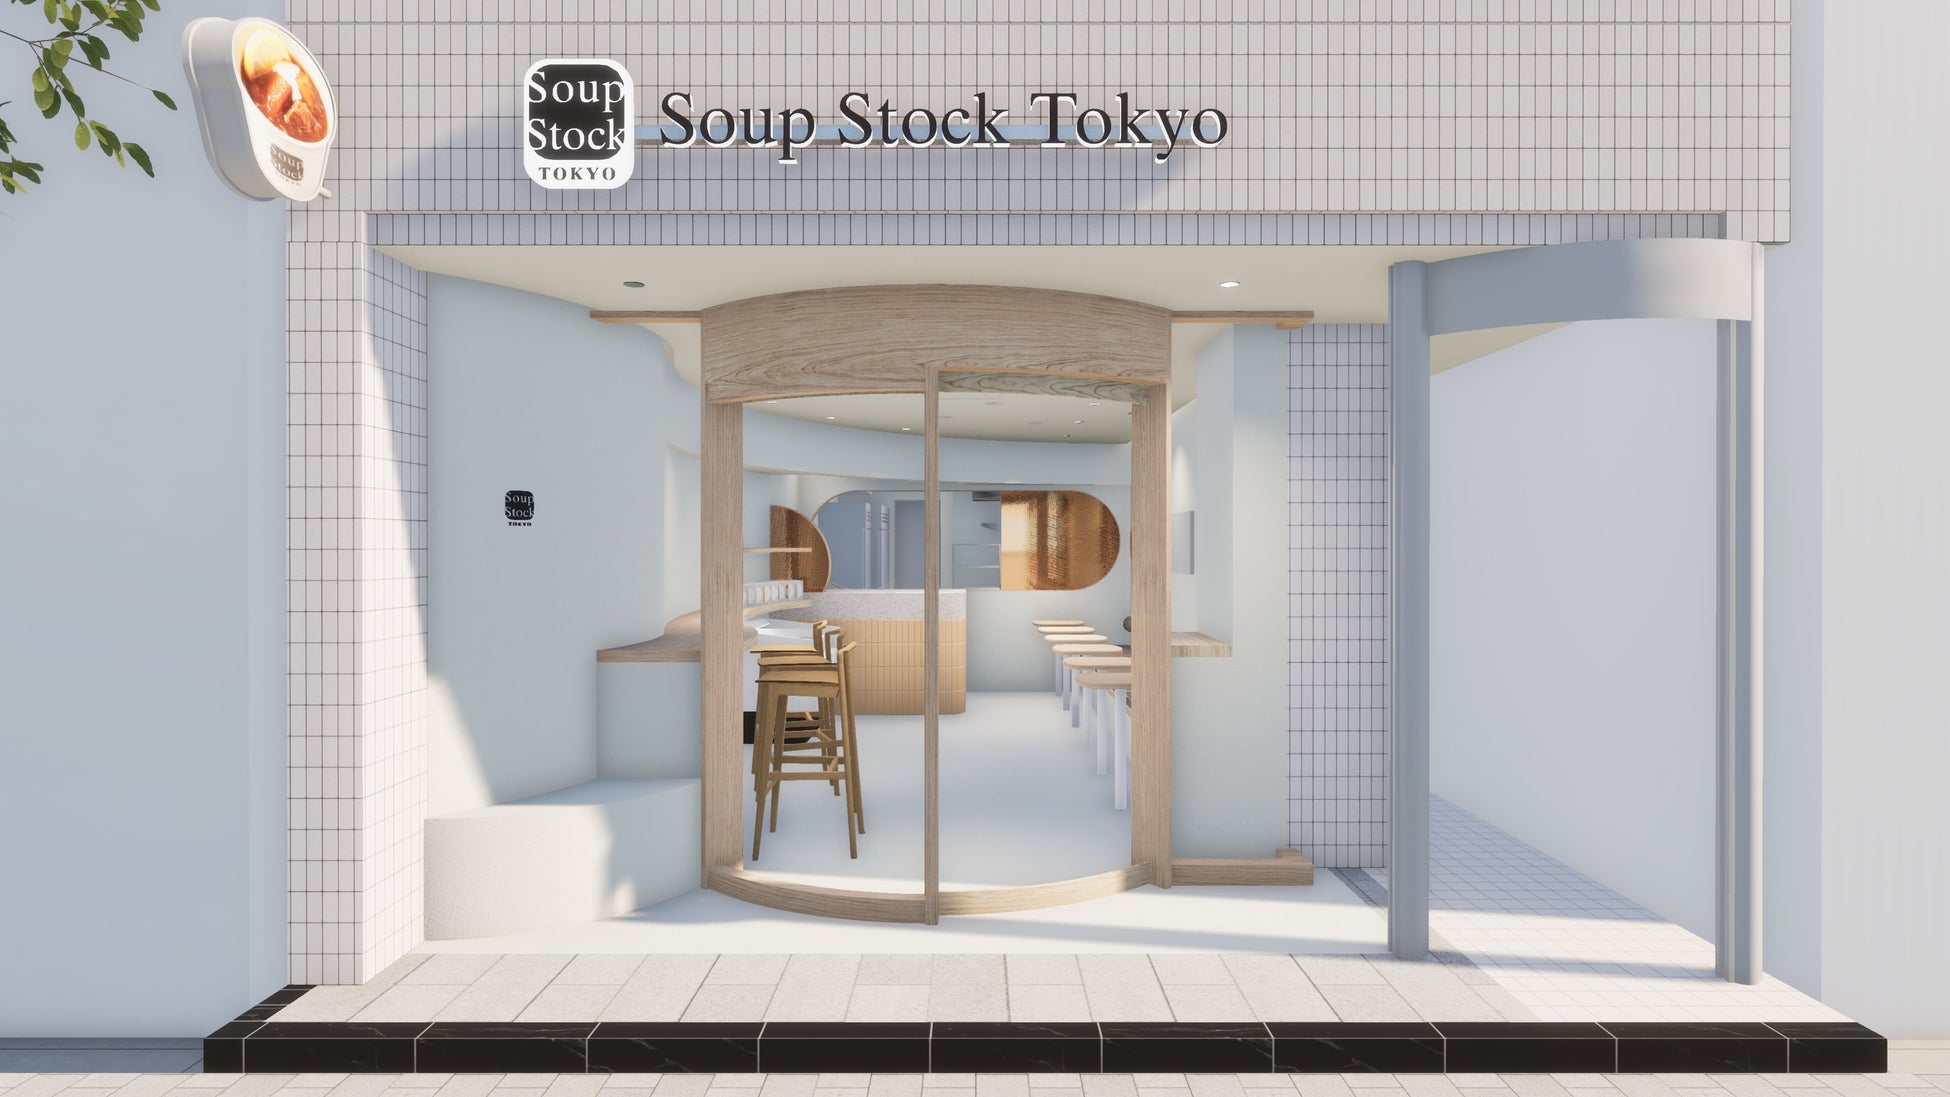 Soup Stock Tokyo桜新町店が、2023年9月15日にオープン